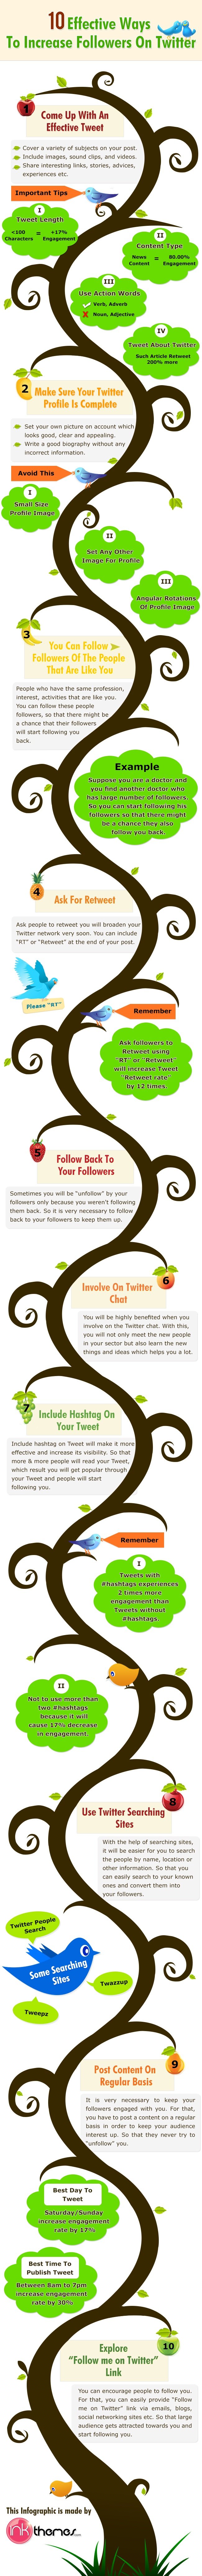 Effective Ways To Increase Followers On Twitter